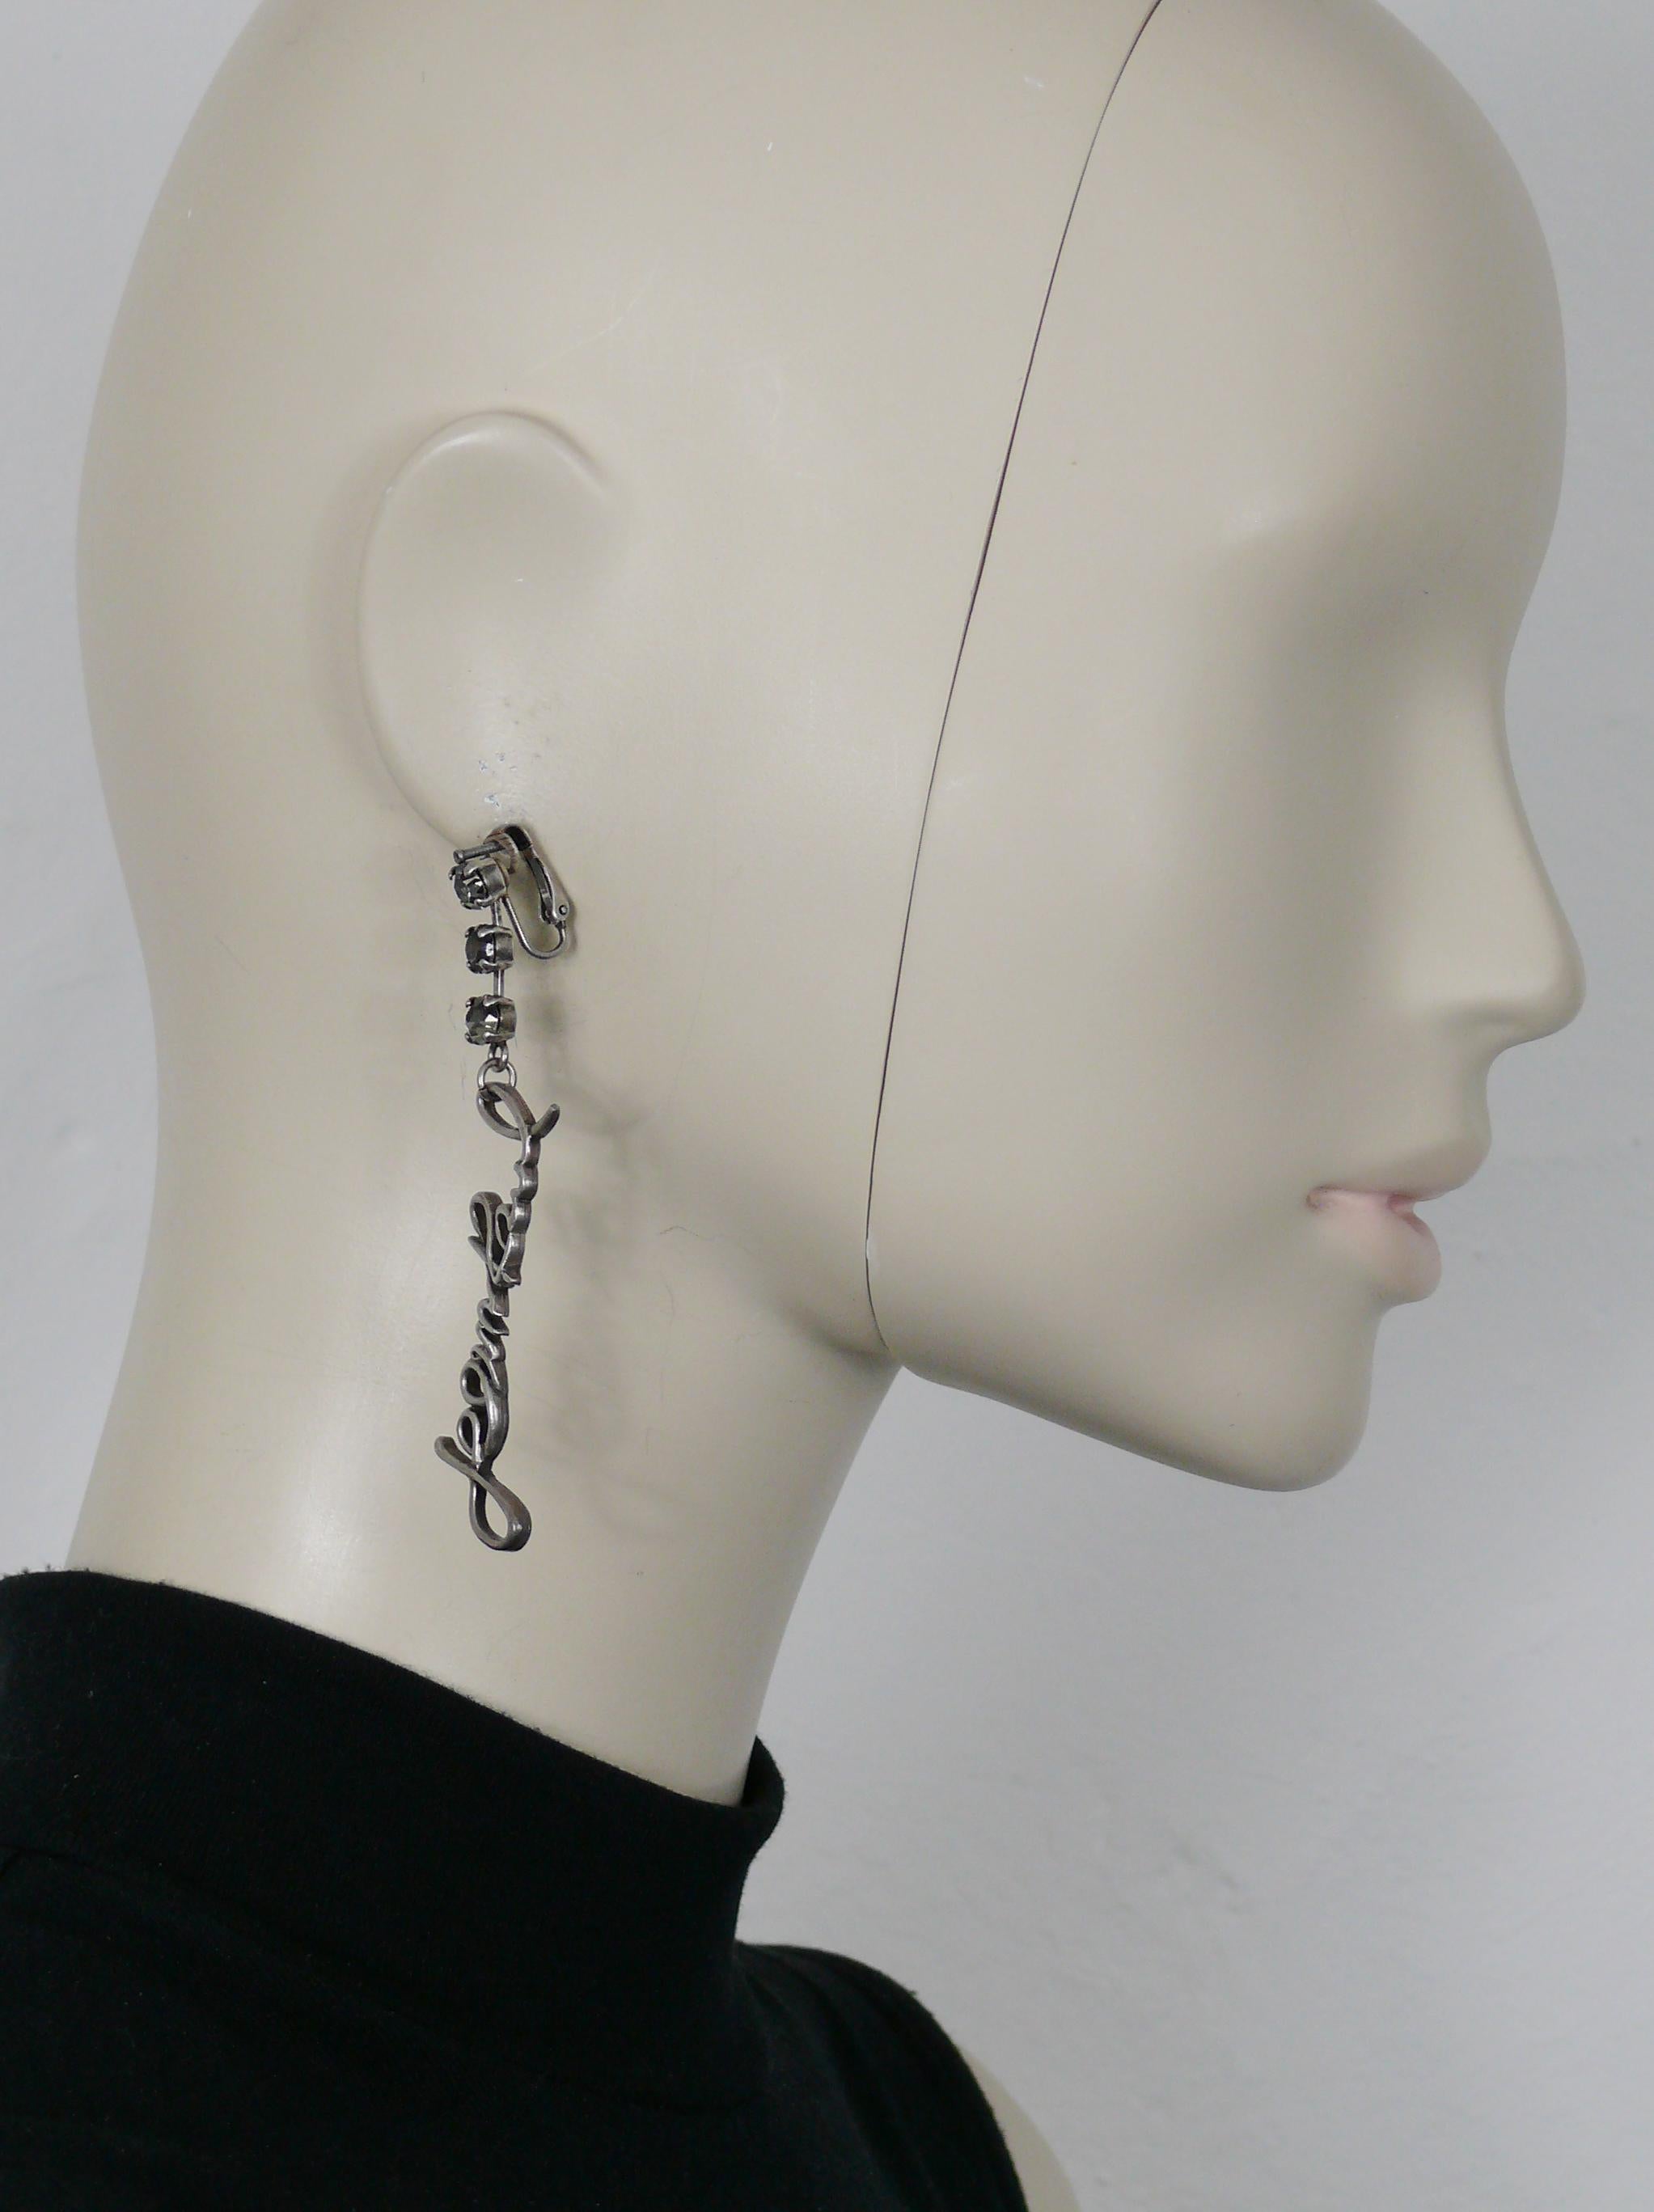 JEAN PAUL GAULTIER antiqued silver tone dangling earrings (clip-on) embellished with crystals and featuring cursive signatures JEAN PAUL and GAULTIER.

Unmarked.

Indicative measurements : max. length approx. 8 cm (3.15 inches) / max. width approx.